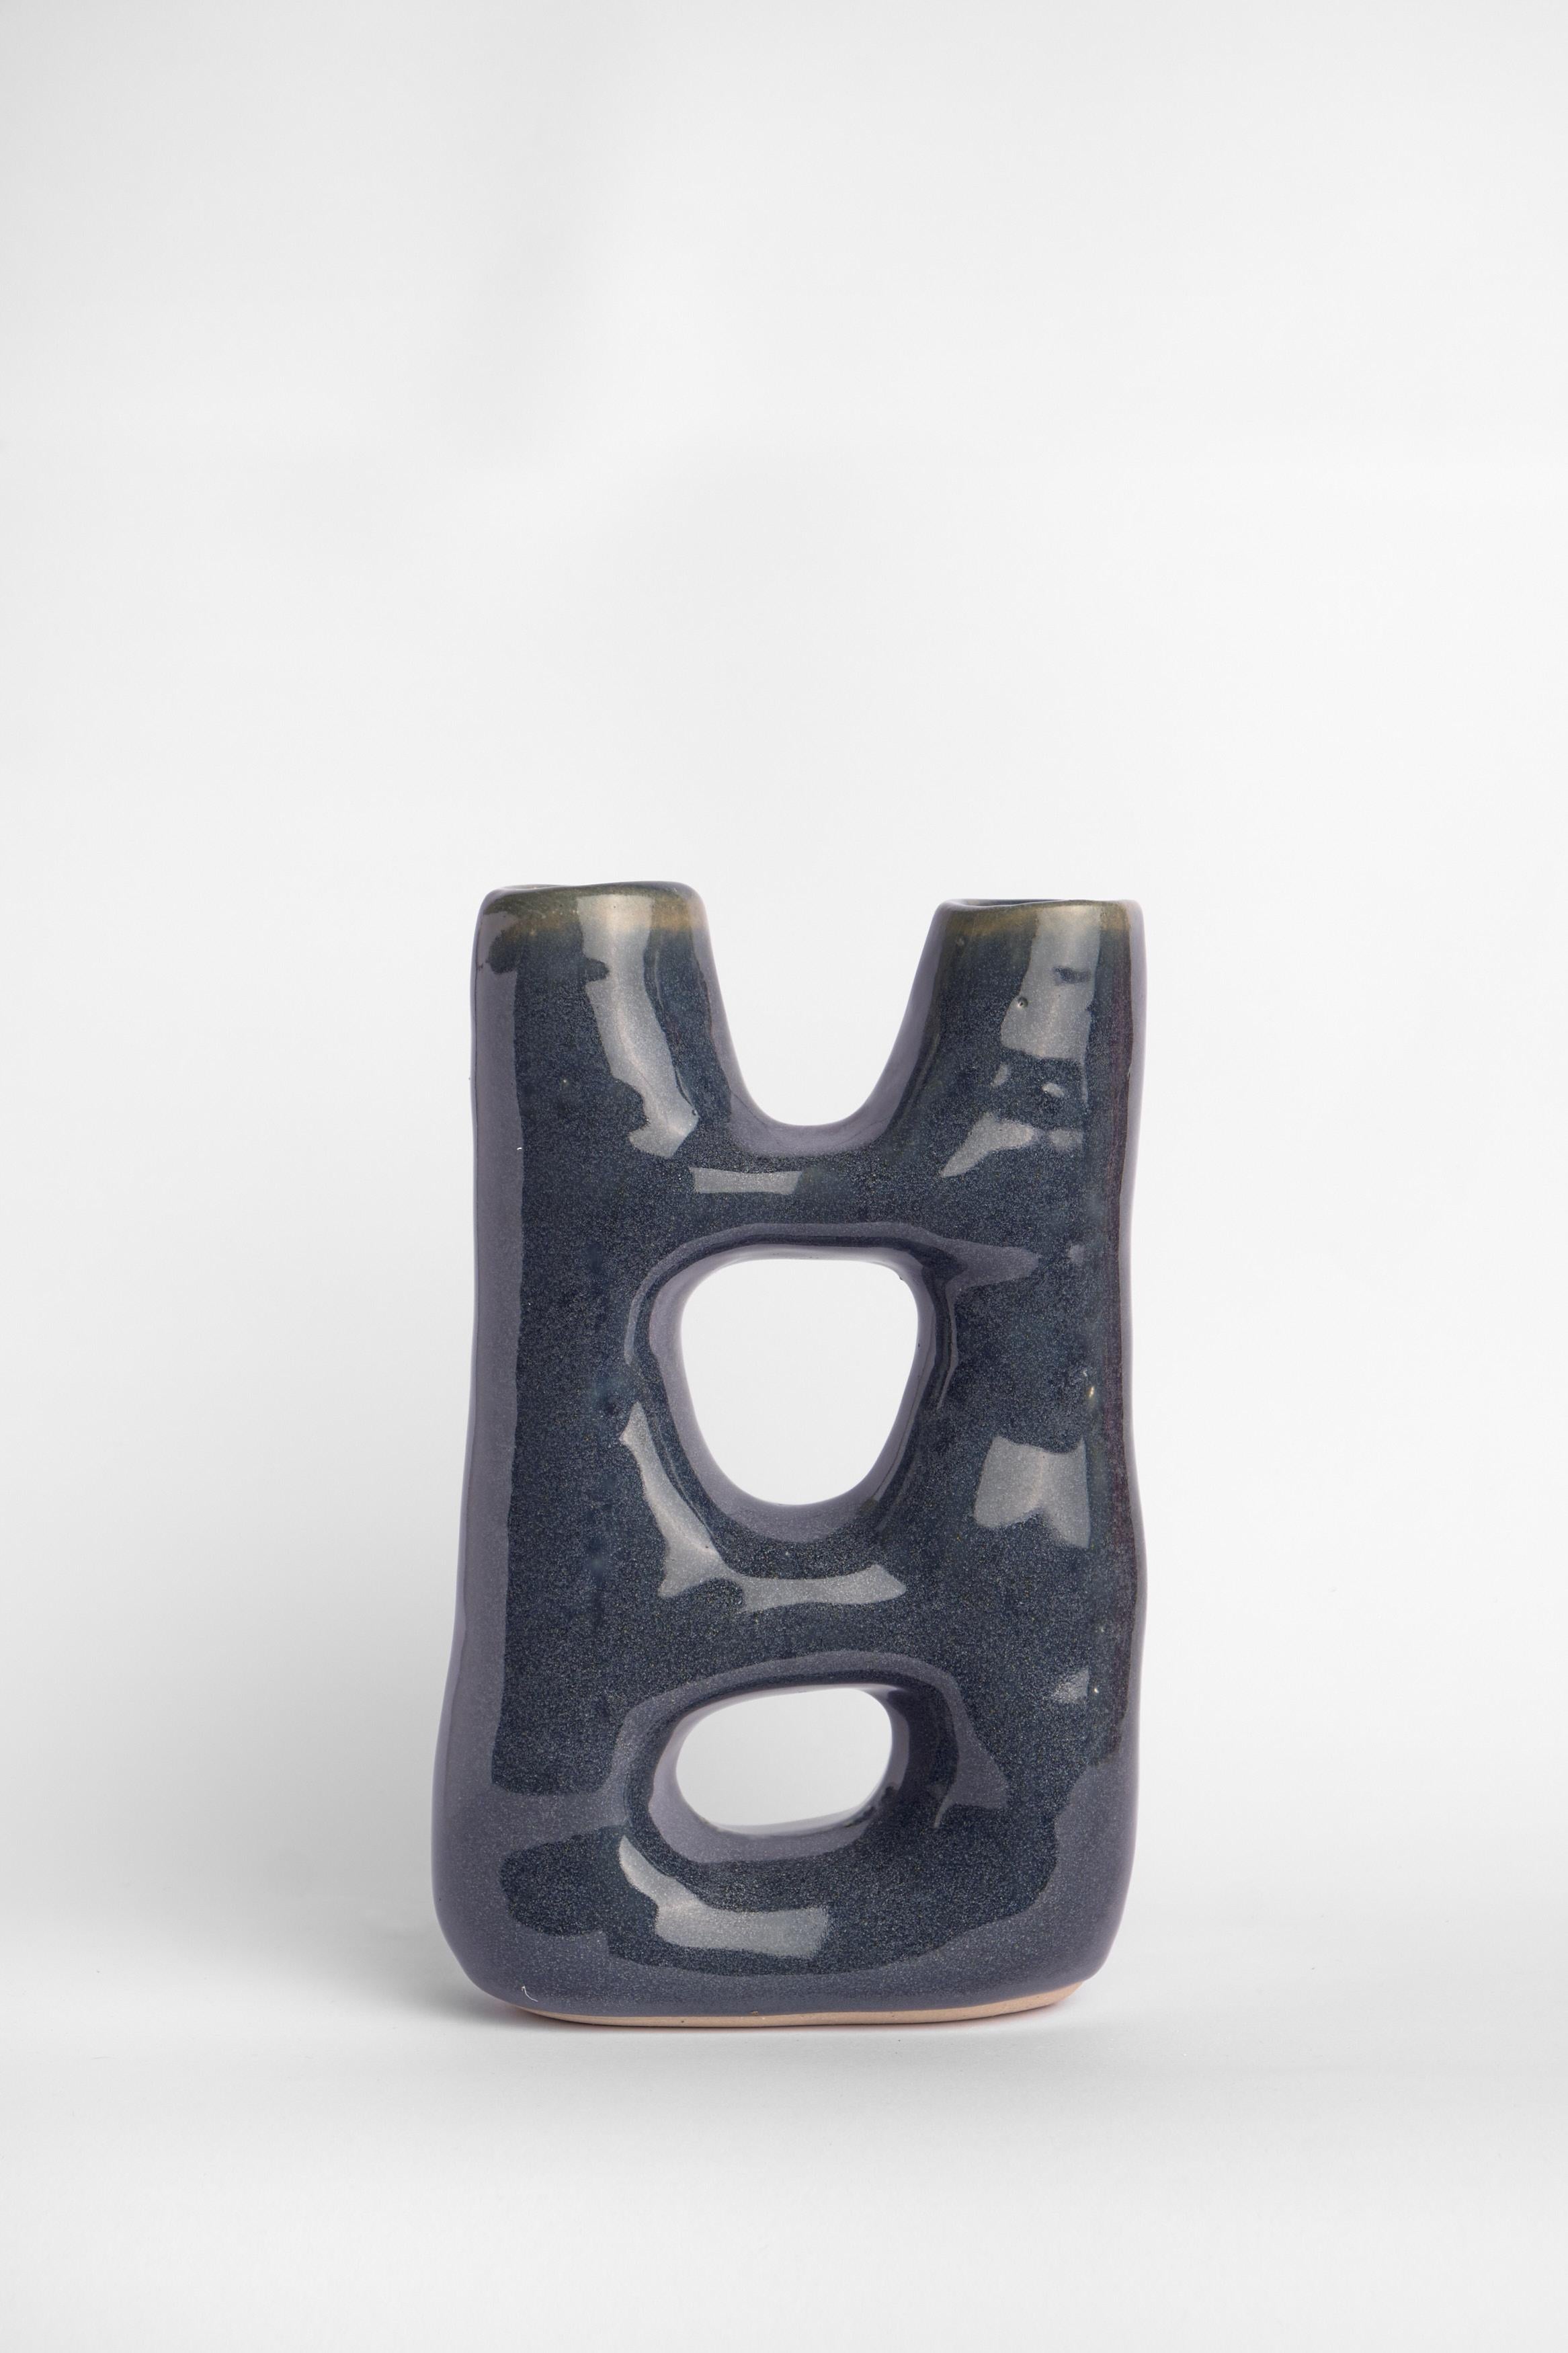 Ceramic sculptural vase from the permanent collection.

Dimensions 17 x 8 x 25.